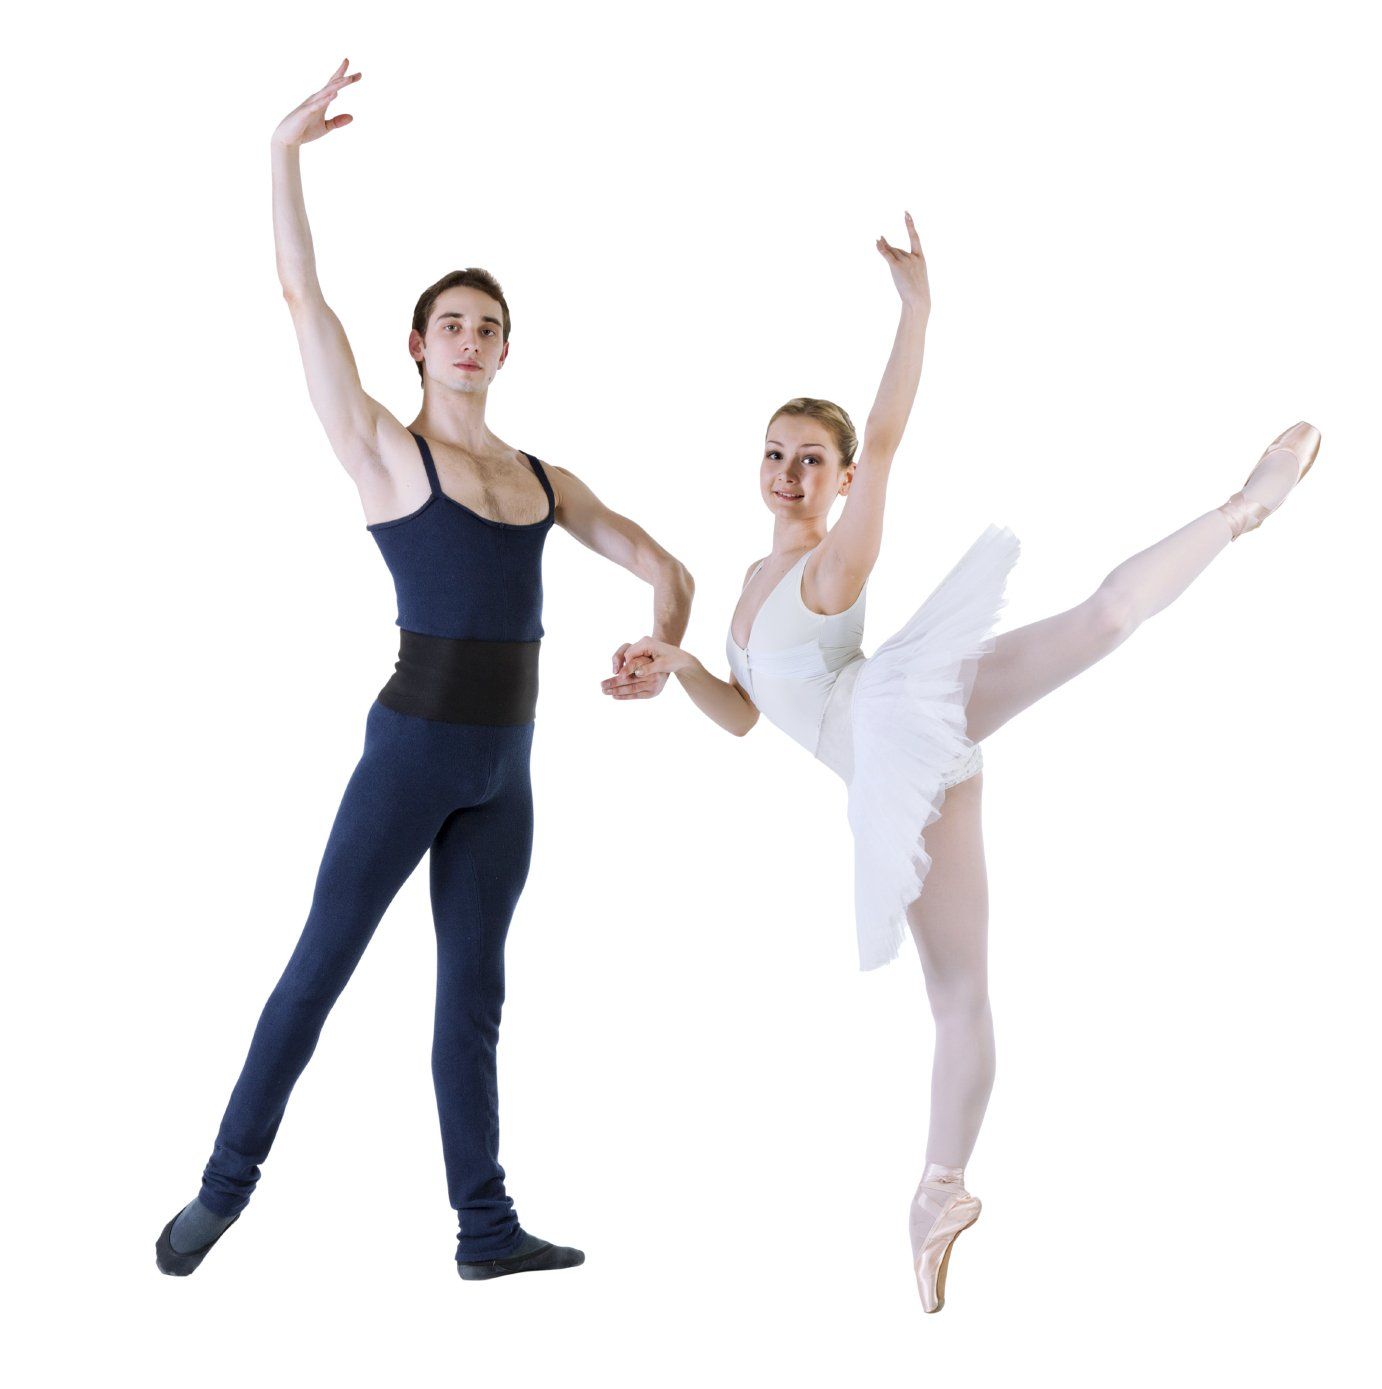 Male and female ballet dancers strike a pose